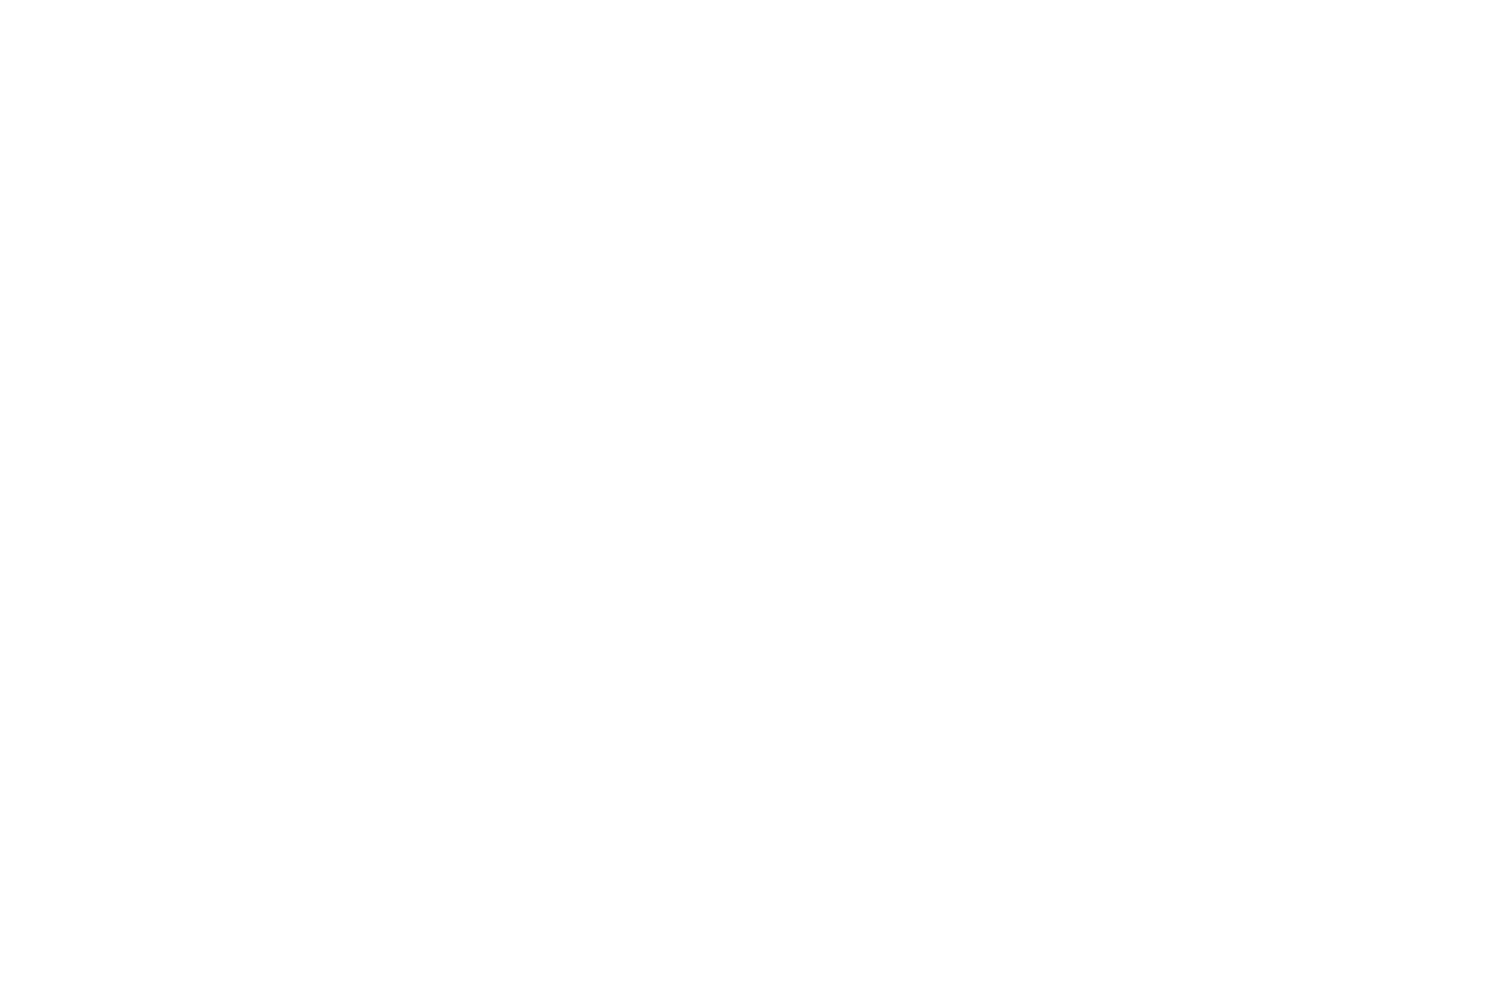 Global Technical Solutions